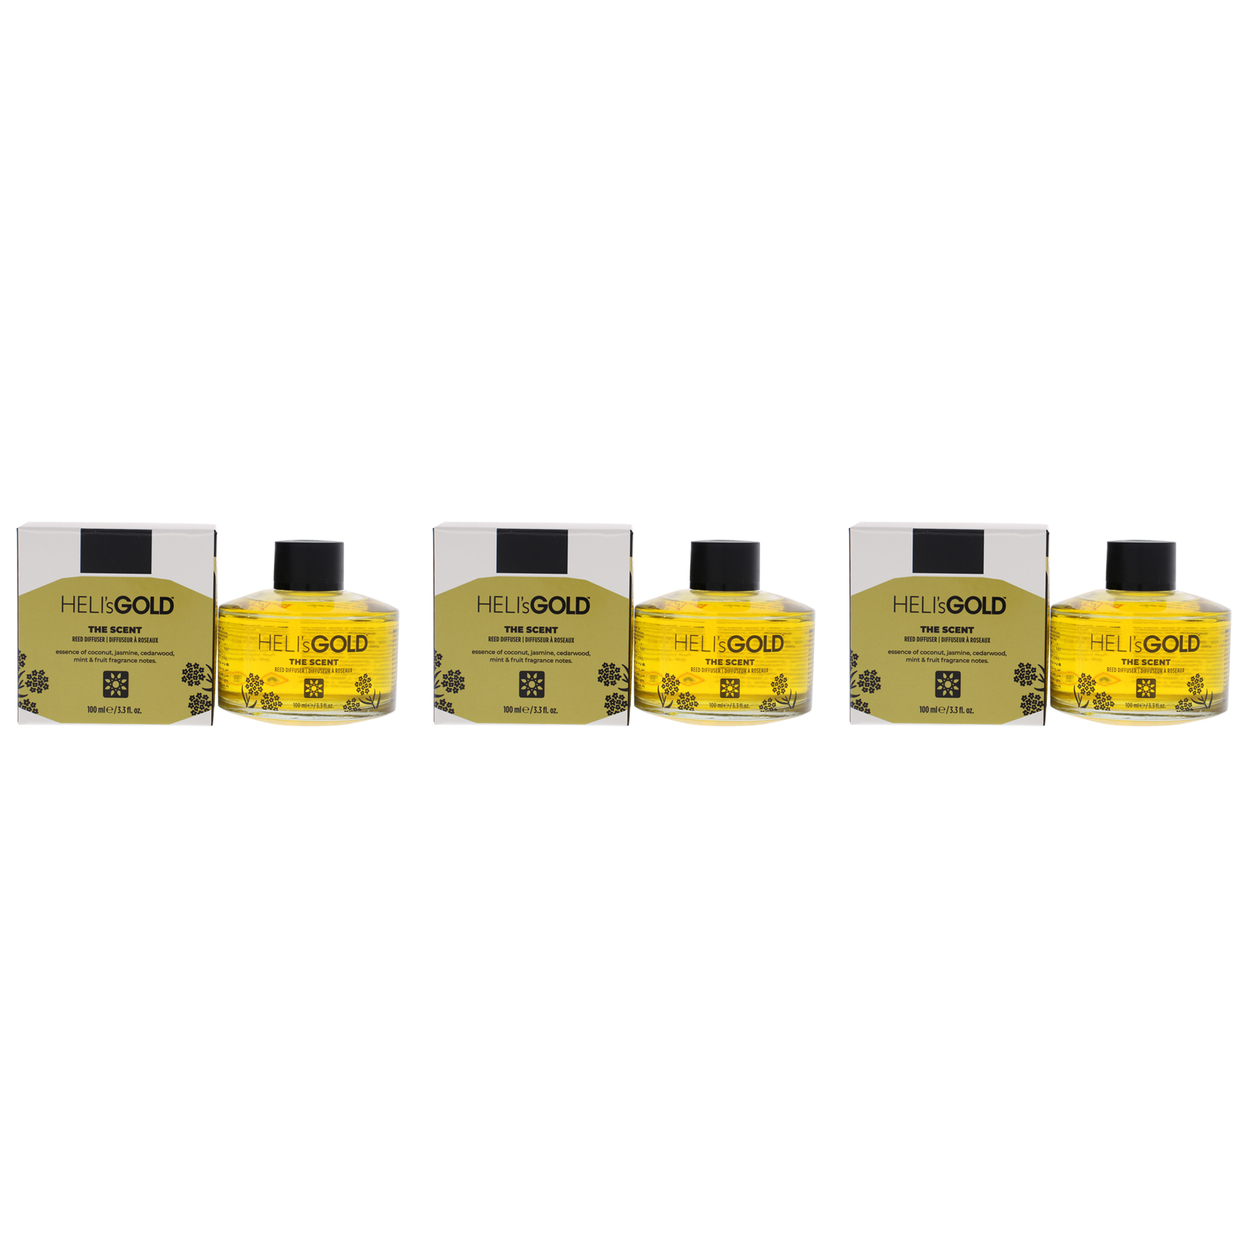 Helis Gold The Scent Reed Difuser Set - Pack Of 3 3.3oz Diffuser, 7Pc Fiber Stick 2 Pc